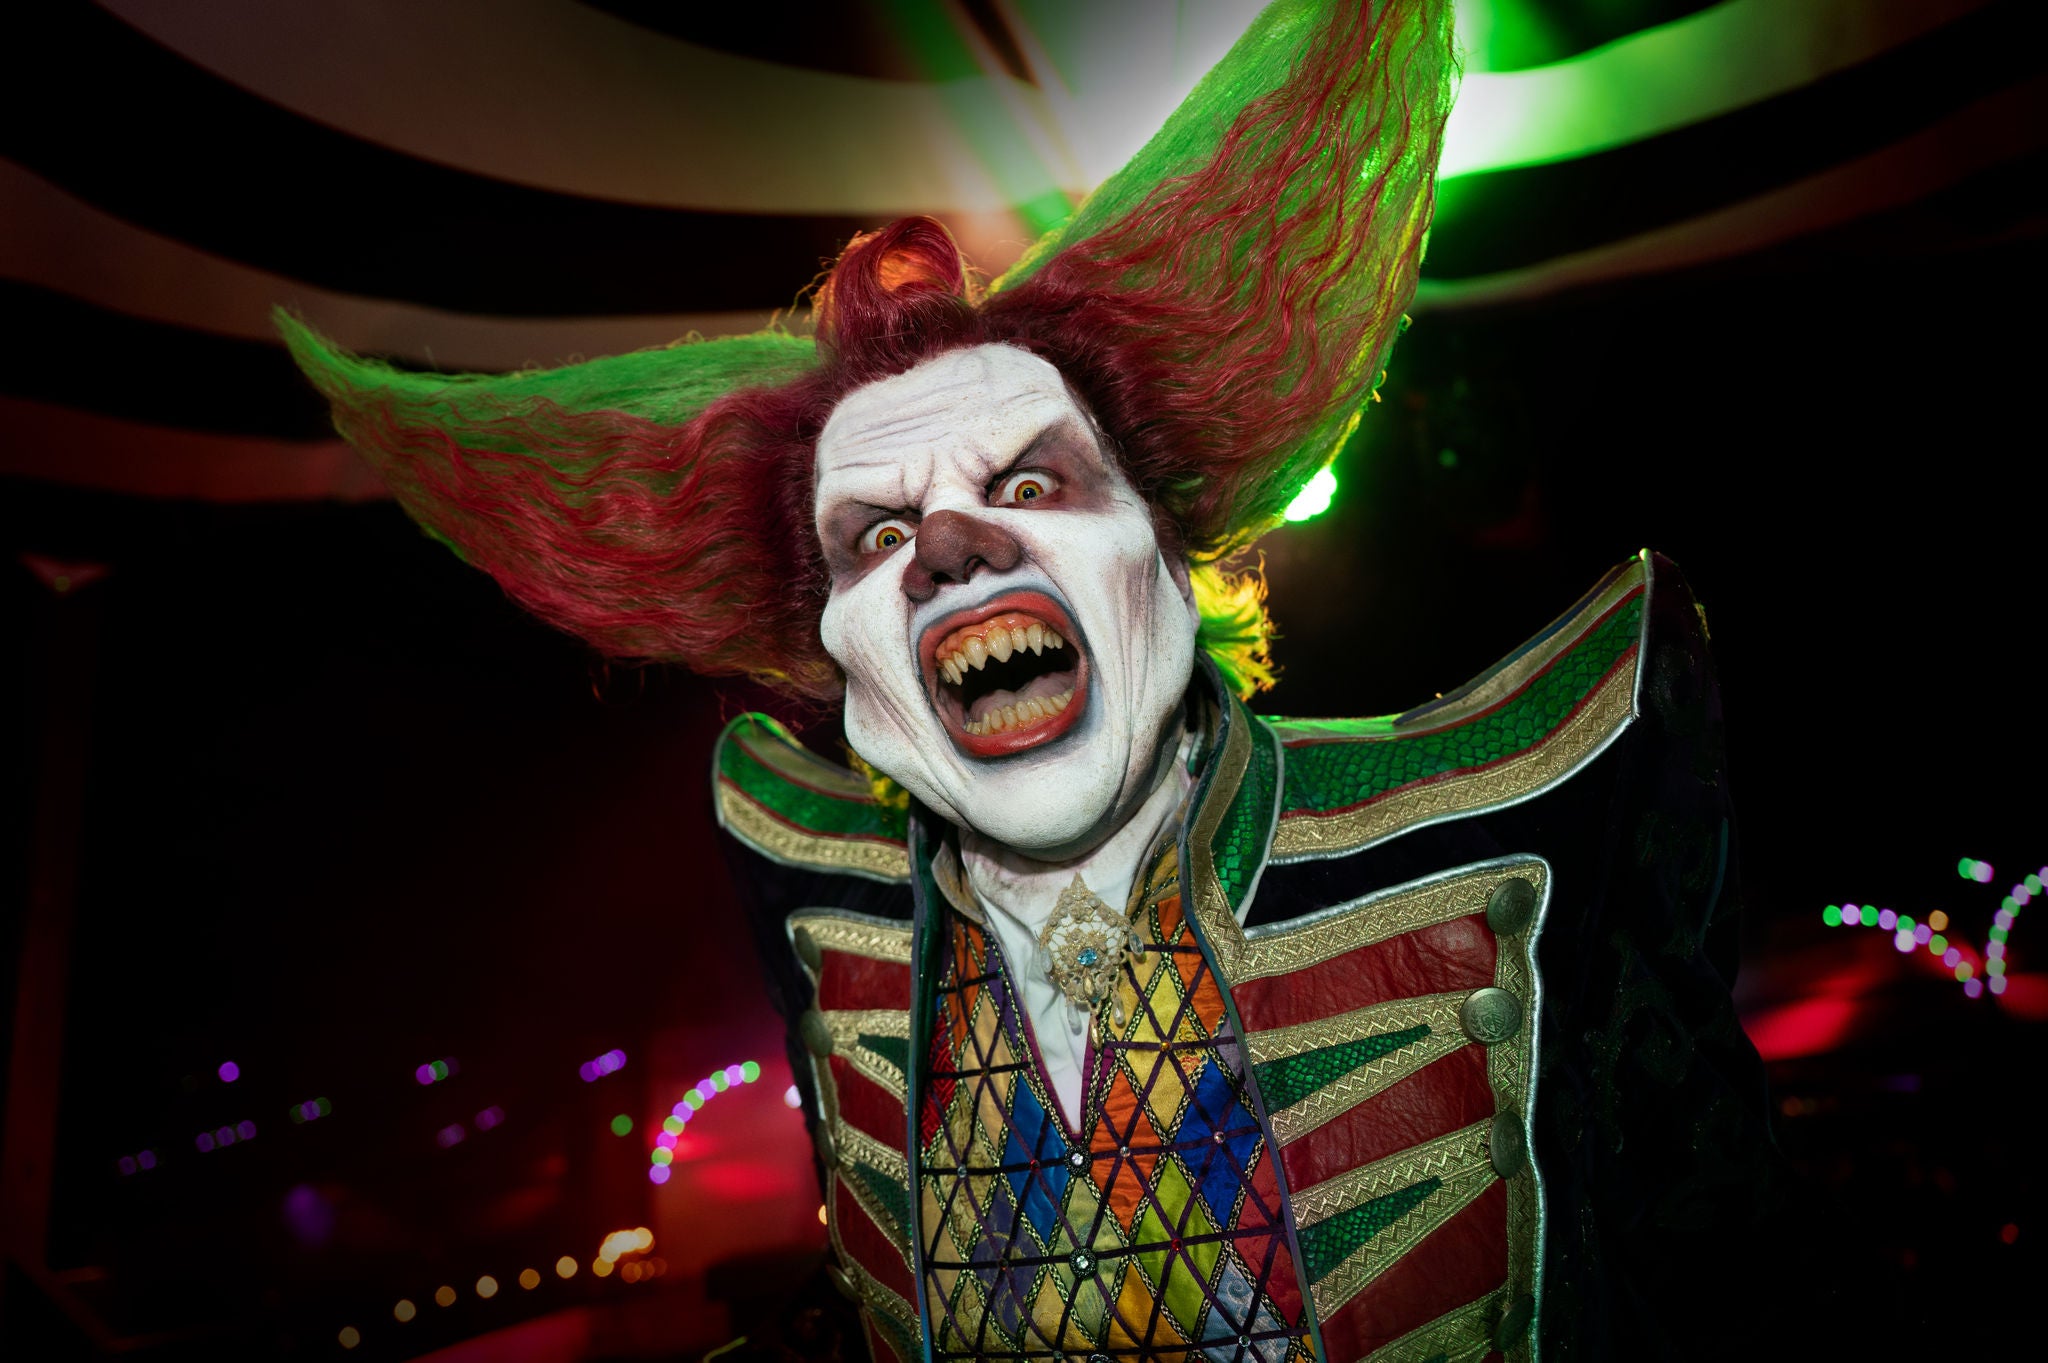 Visit Walibi in october and experience the horror of Halloween Fright Nights.